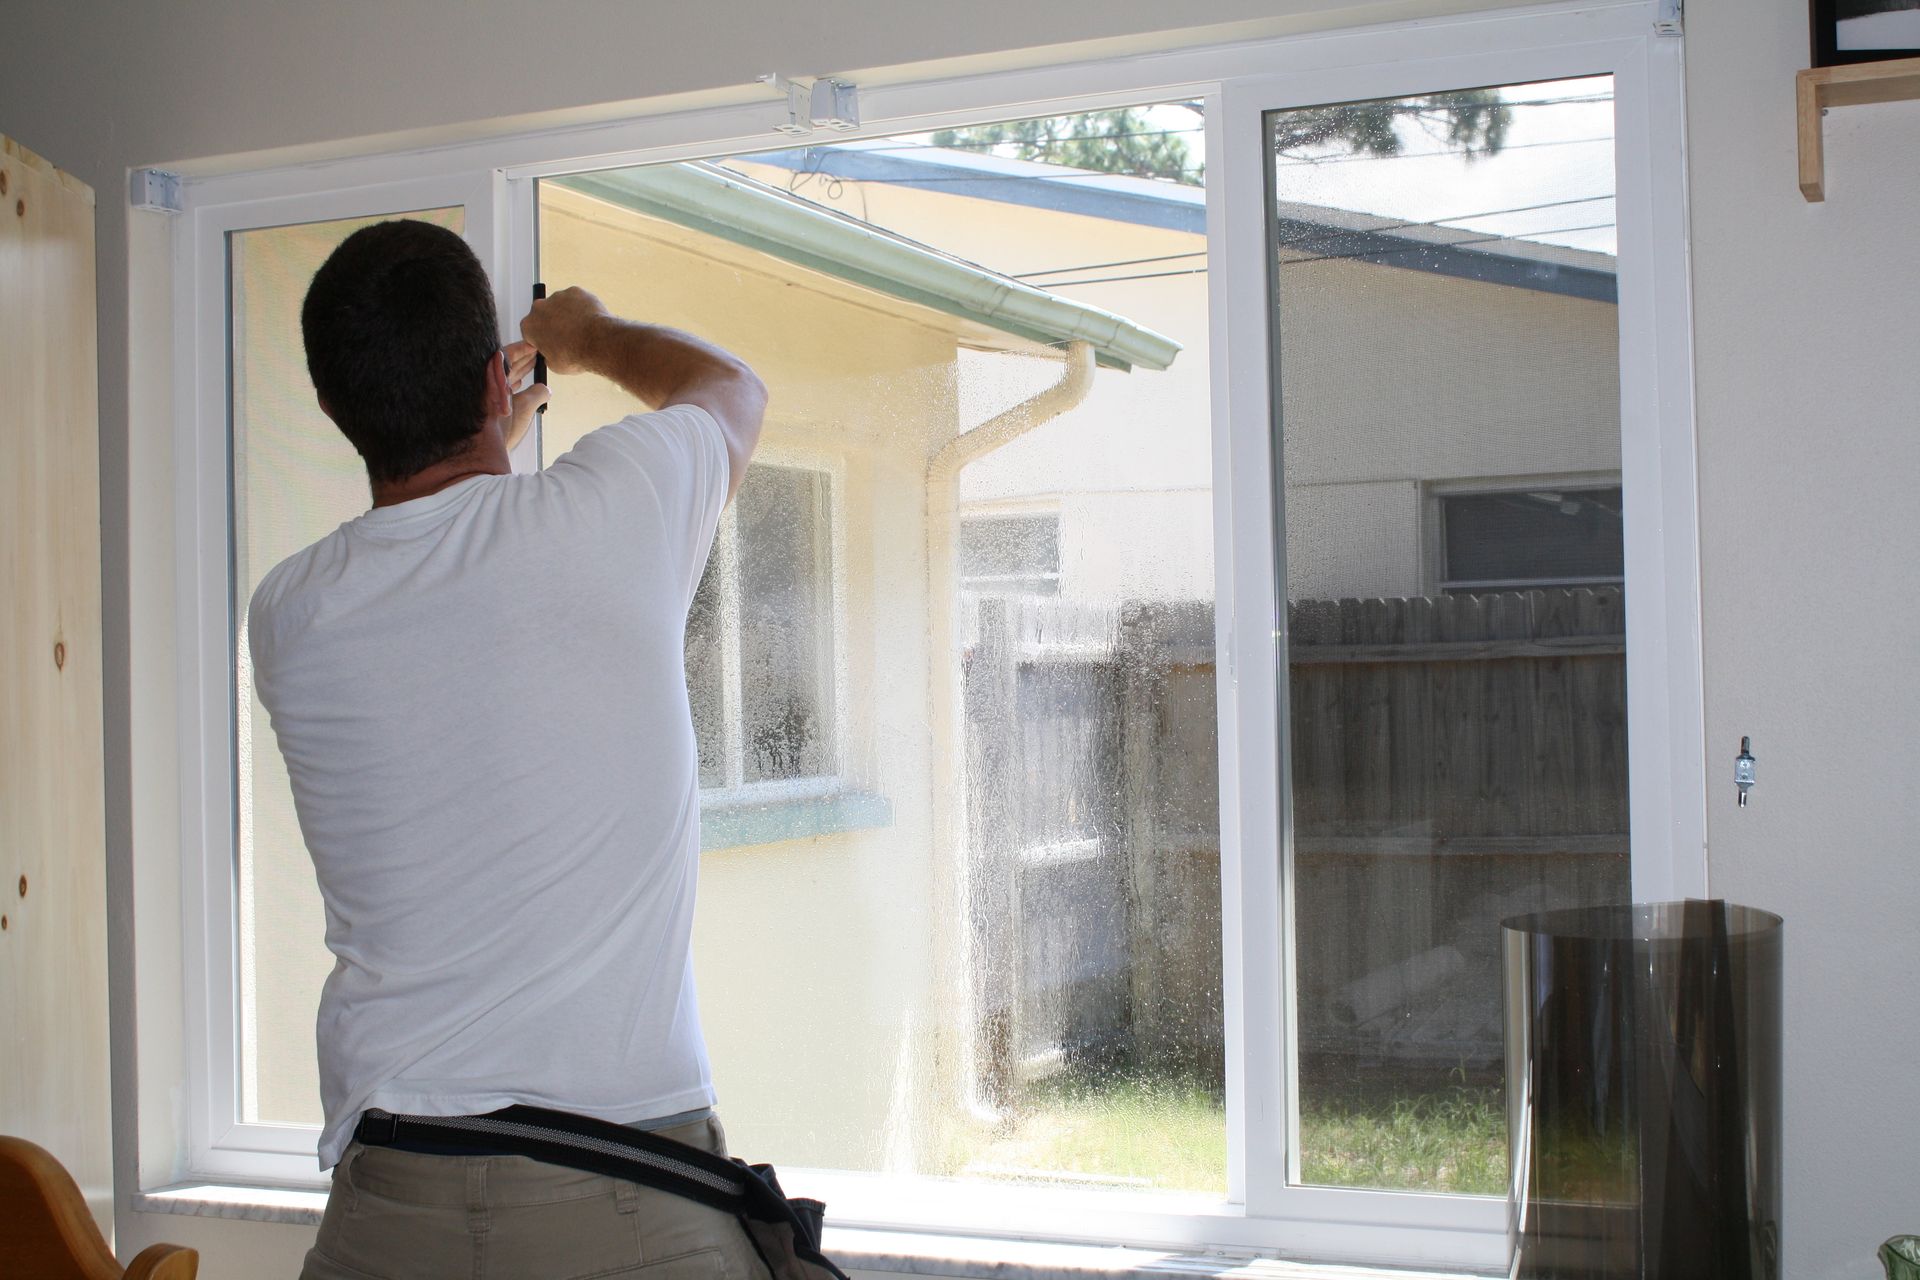 A man is installing window tinting in a house